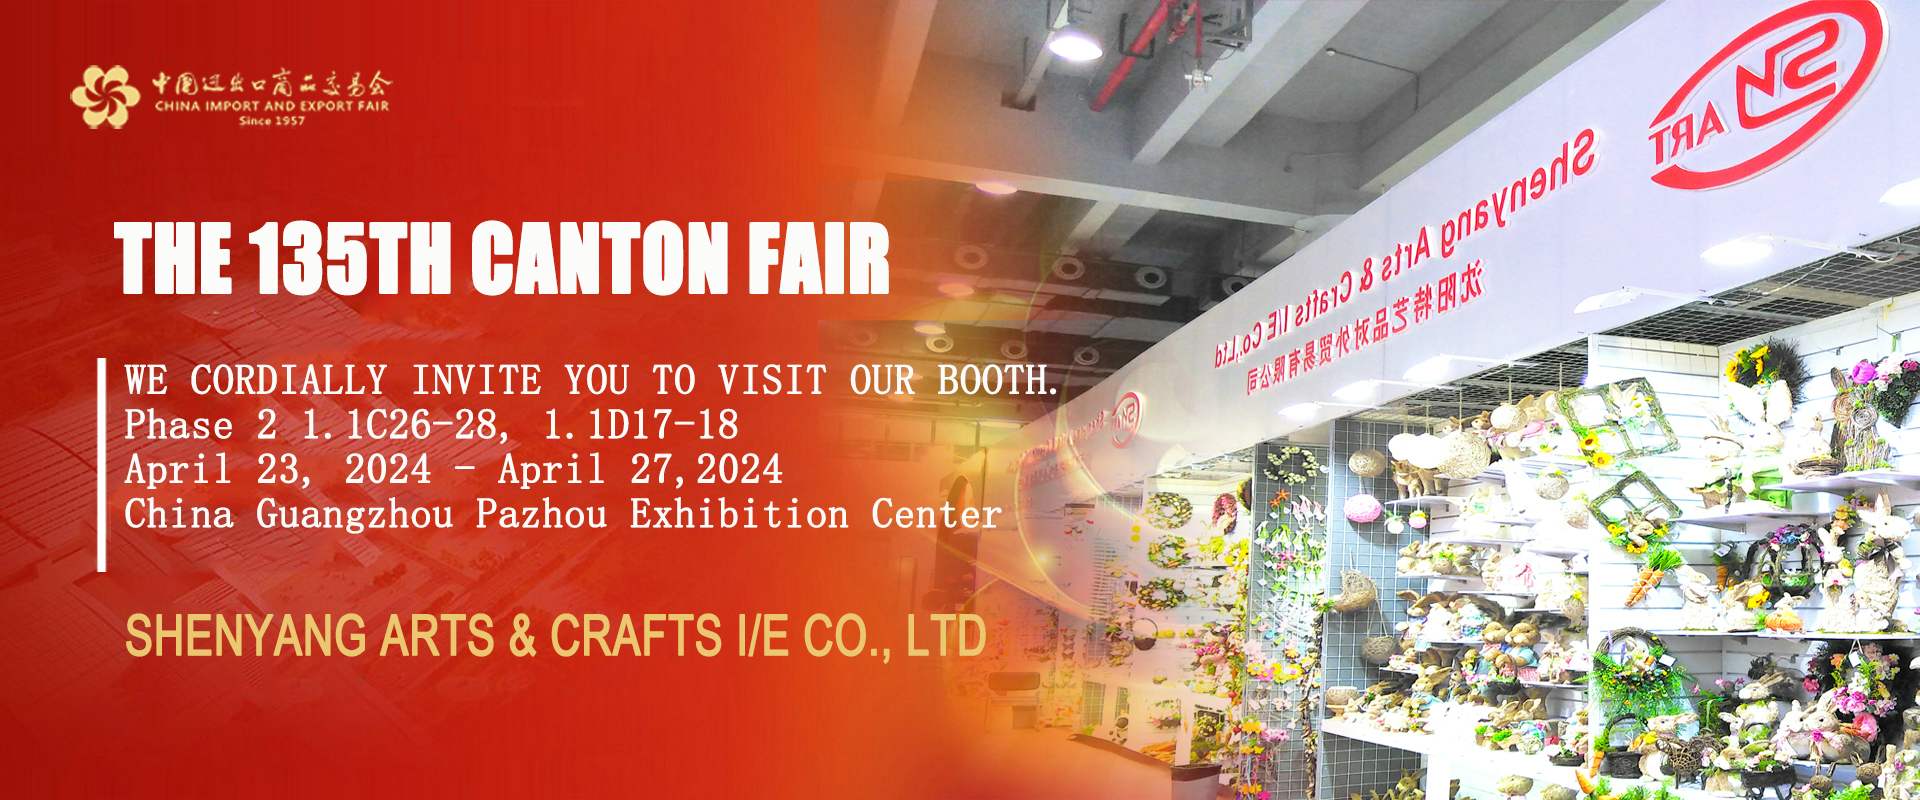 We look forward to meeting you at the 135th Canton Fair!